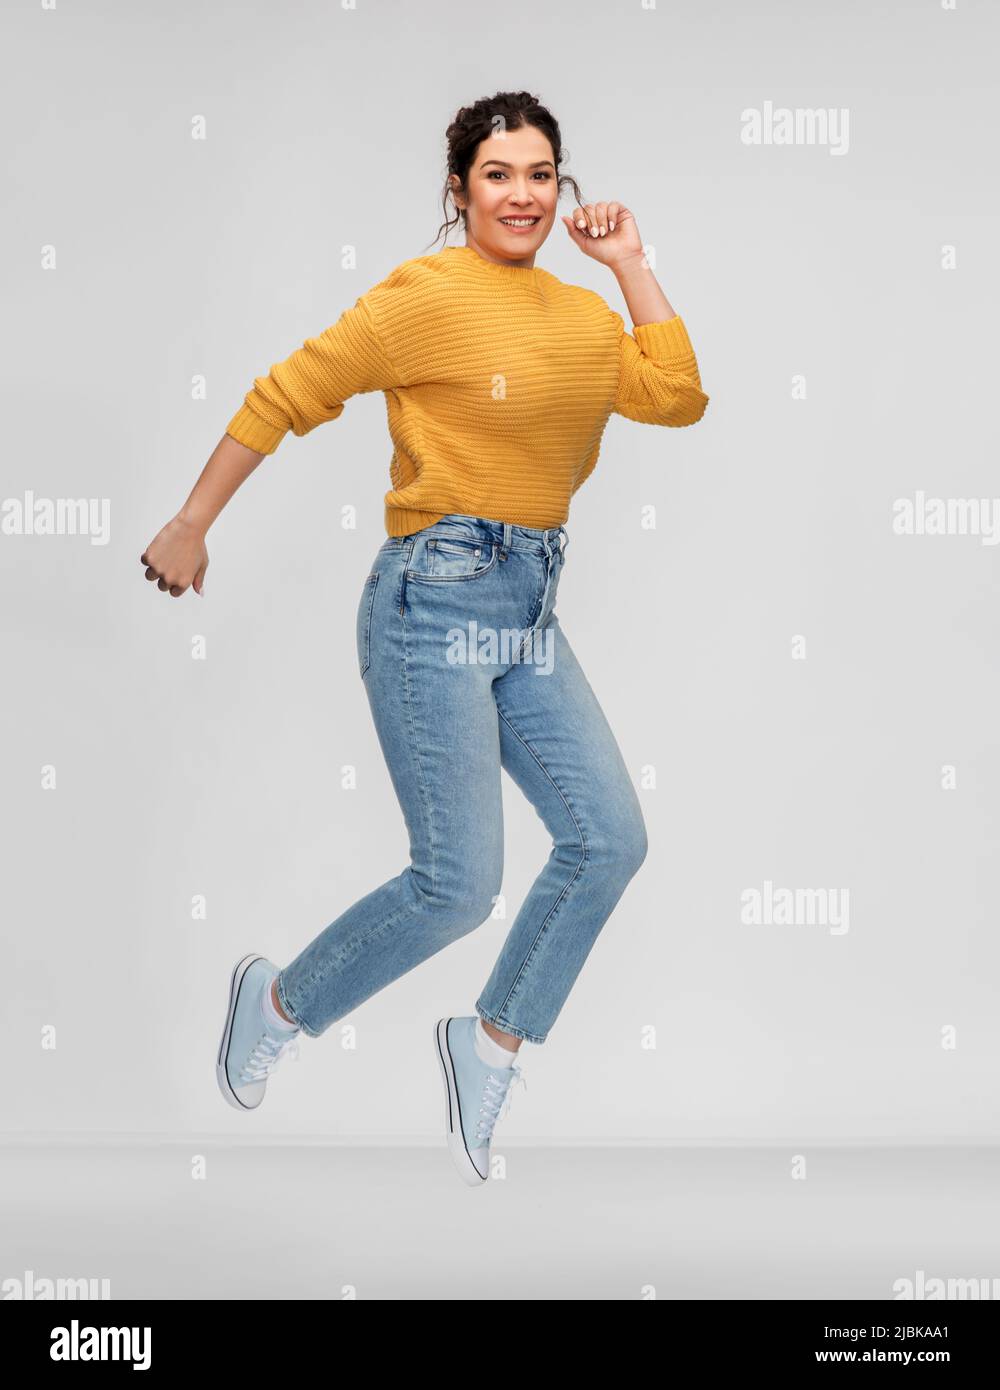 happy young woman with pierced nose jumping Stock Photo